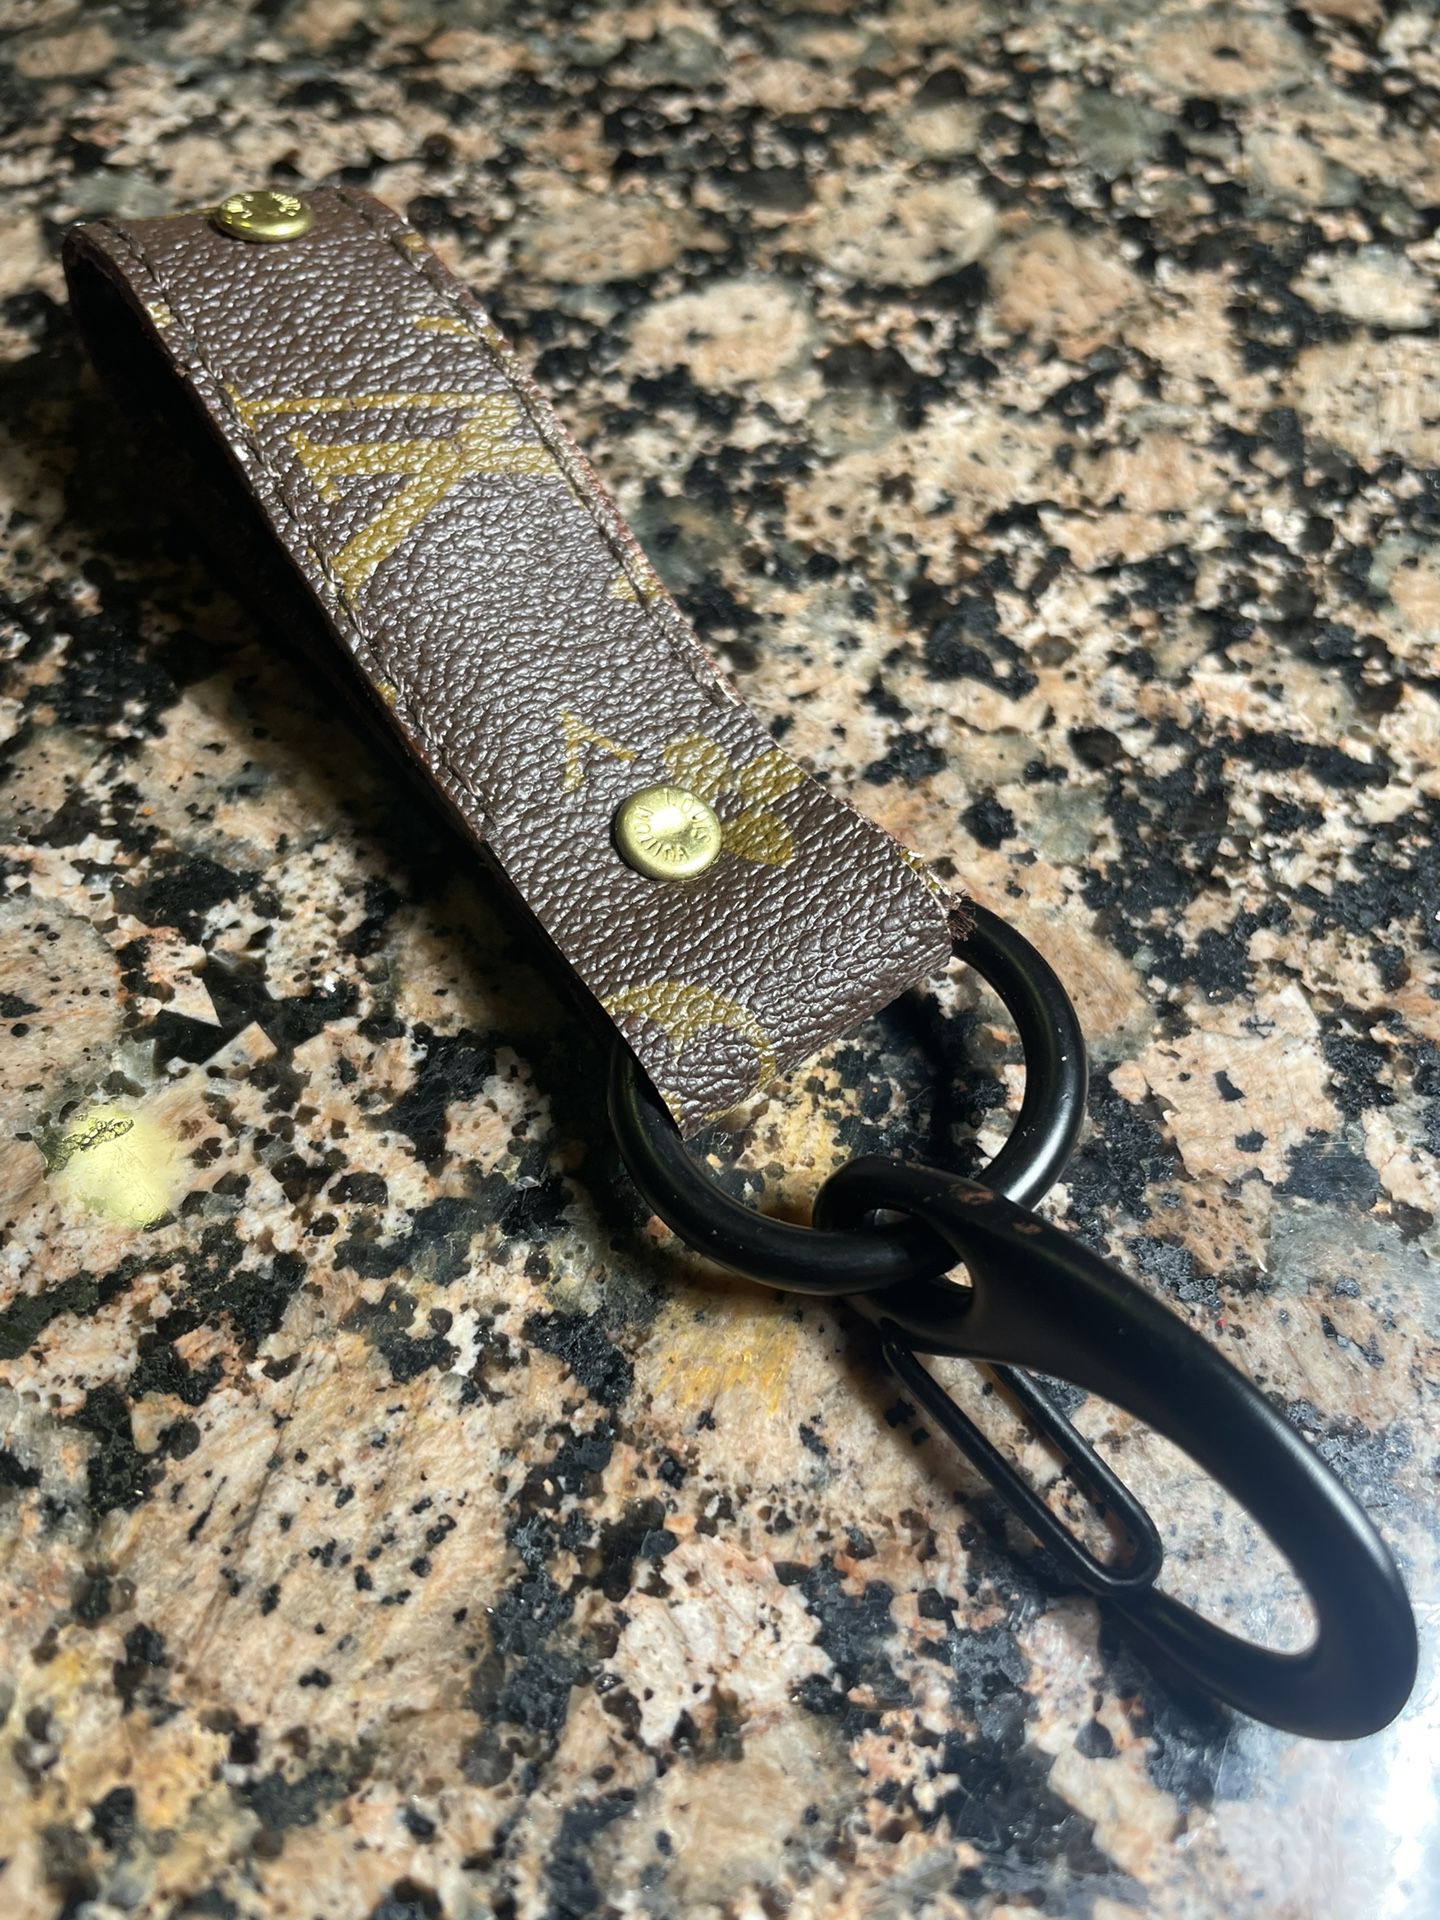 Repurposed Louis Vuitton Keychains for Sale in Hayward, CA - OfferUp